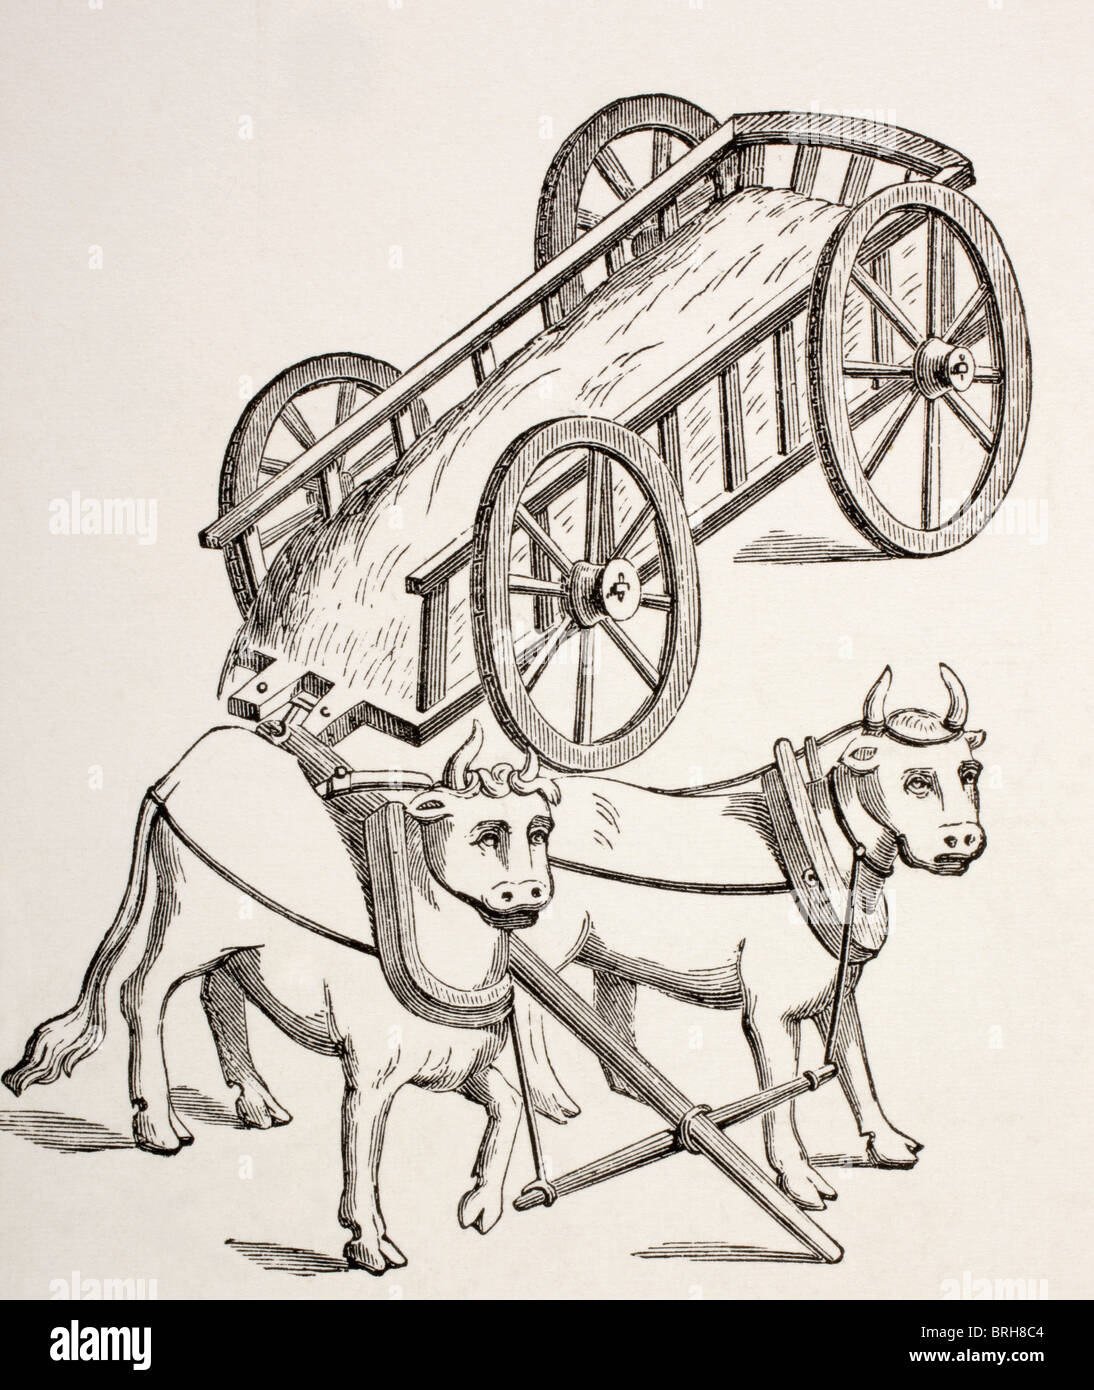 Cart drawn by oxen. 15th century. Stock Photo